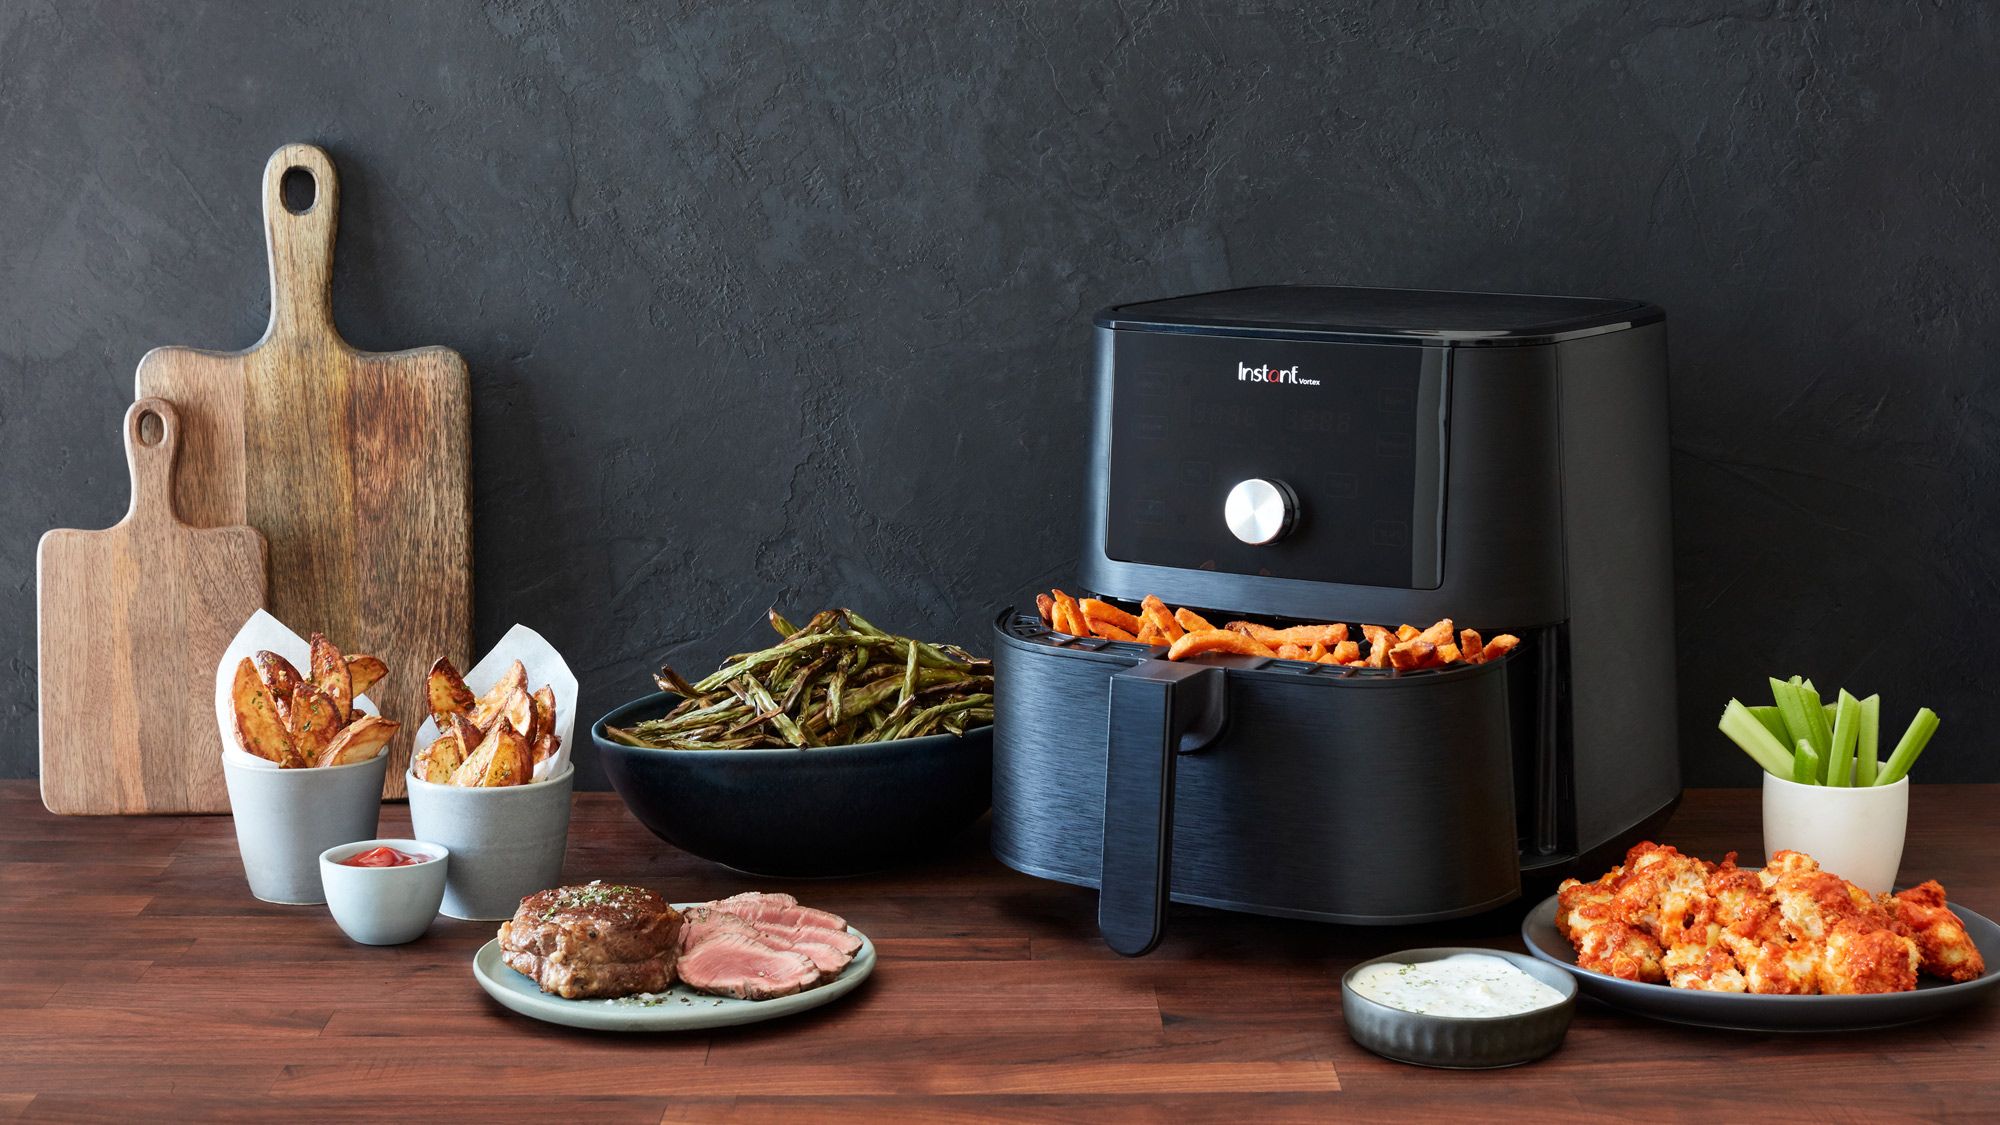 How Does an Air Fryer Work? Here's Everything You Need to Know